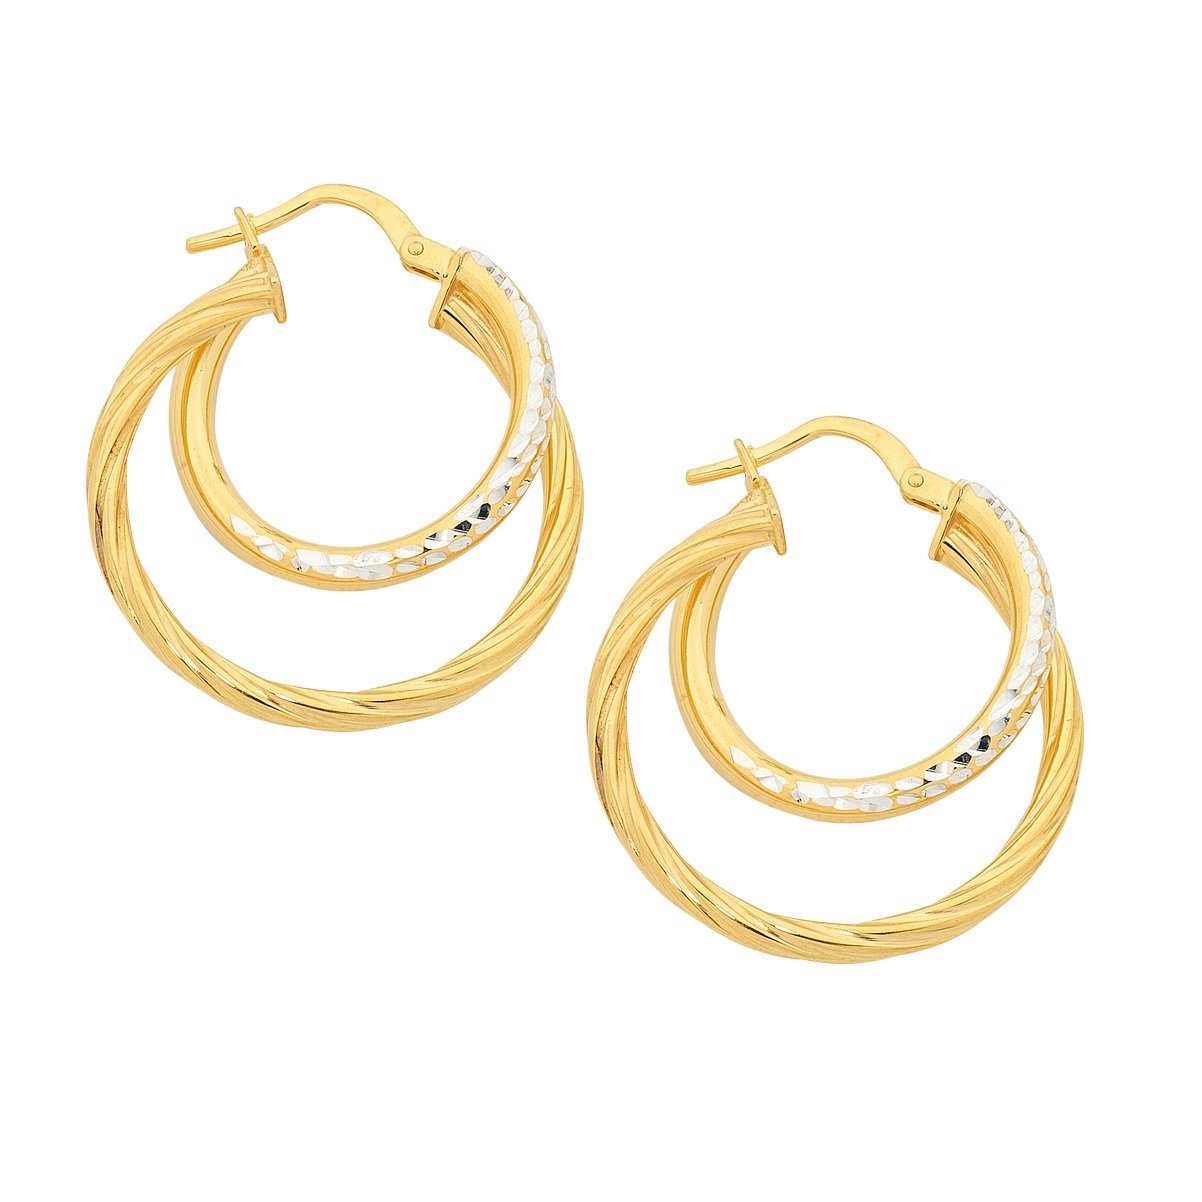 Bevilles 9ct Two Tone Silver Infused Double Hoop Earrings